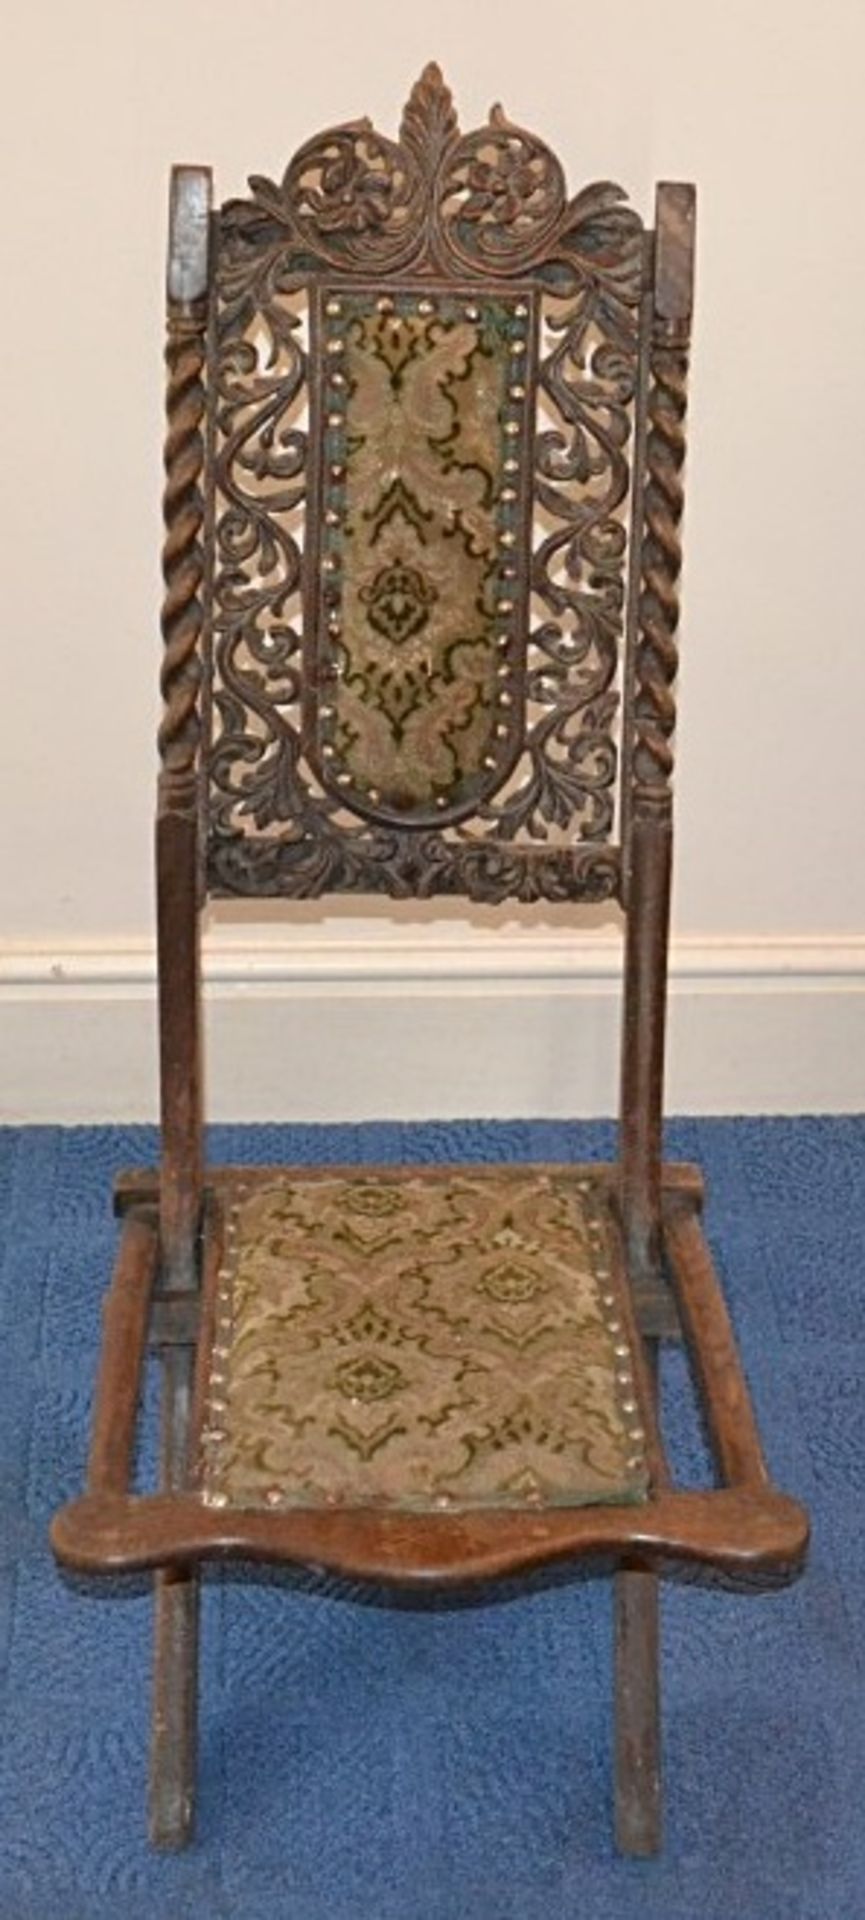 1 x Antique Victorian Upholstered Folding Chair - From A Grade II Listed Hall In Good Original